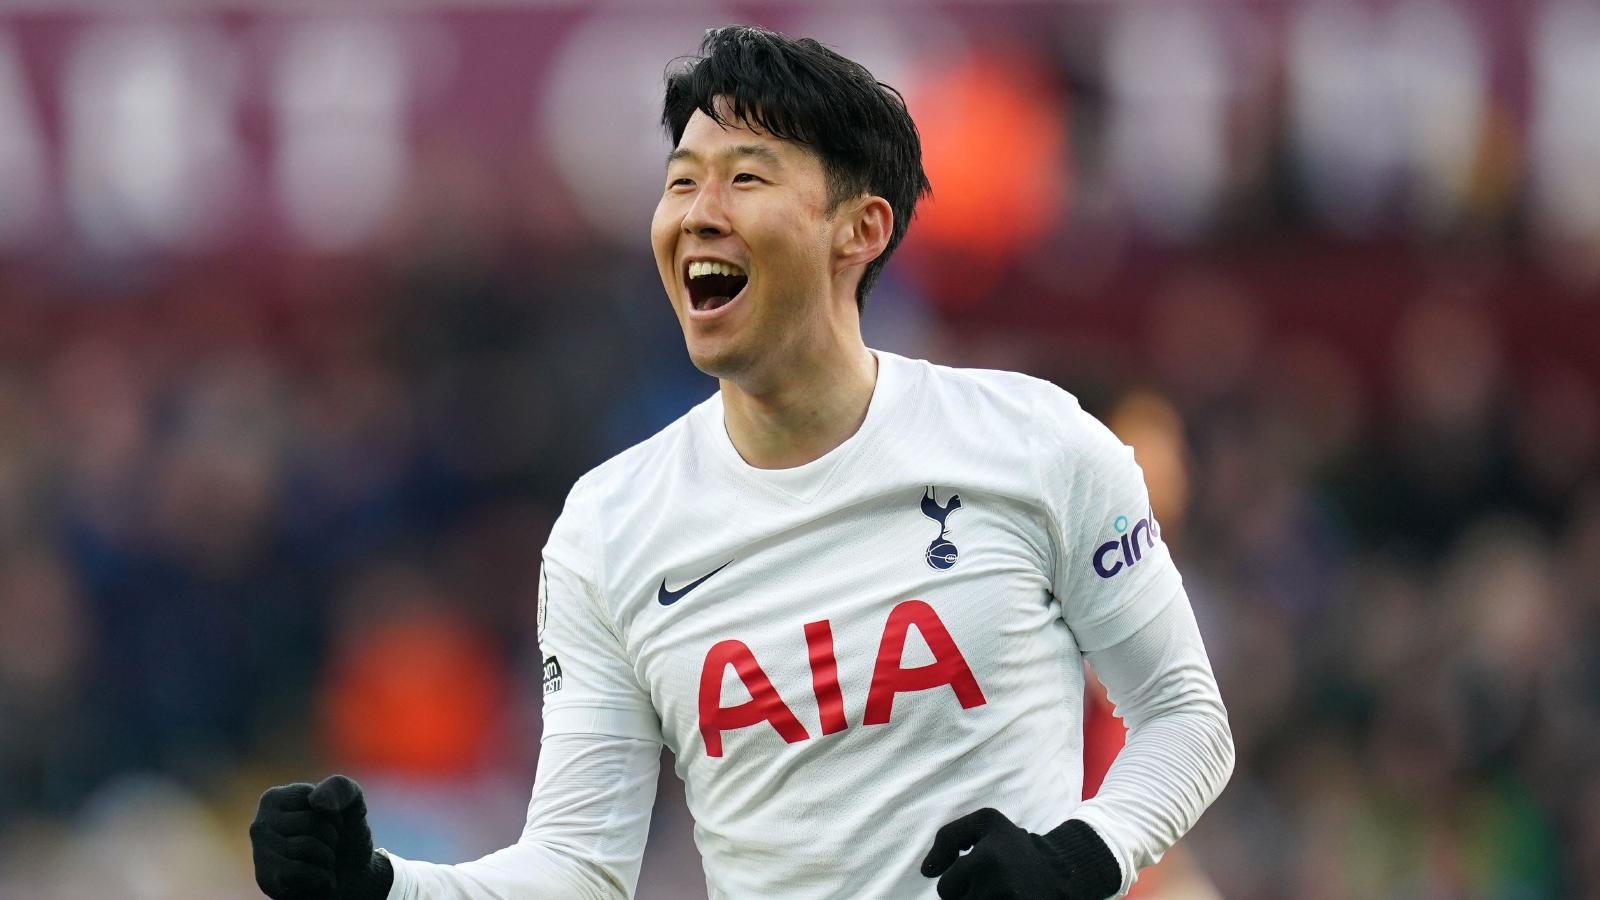 Son Heung-min Age, Salary, Net worth, Current Teams, Career, Height, and much more